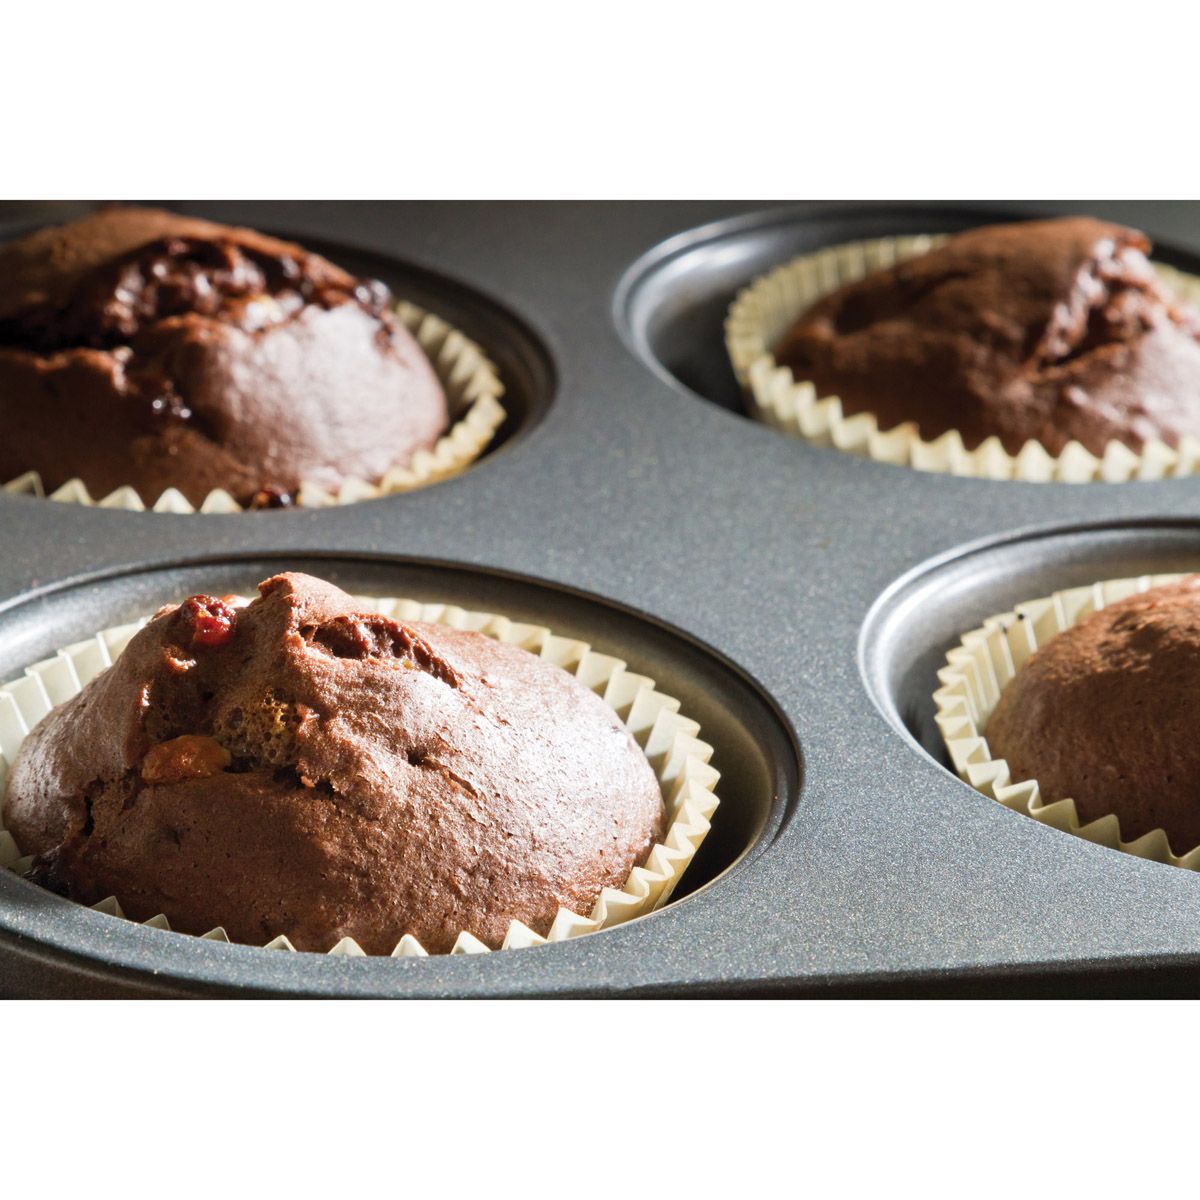 6 Cup Jumbo Muffin Pan, Non-Stick Carbon Steel